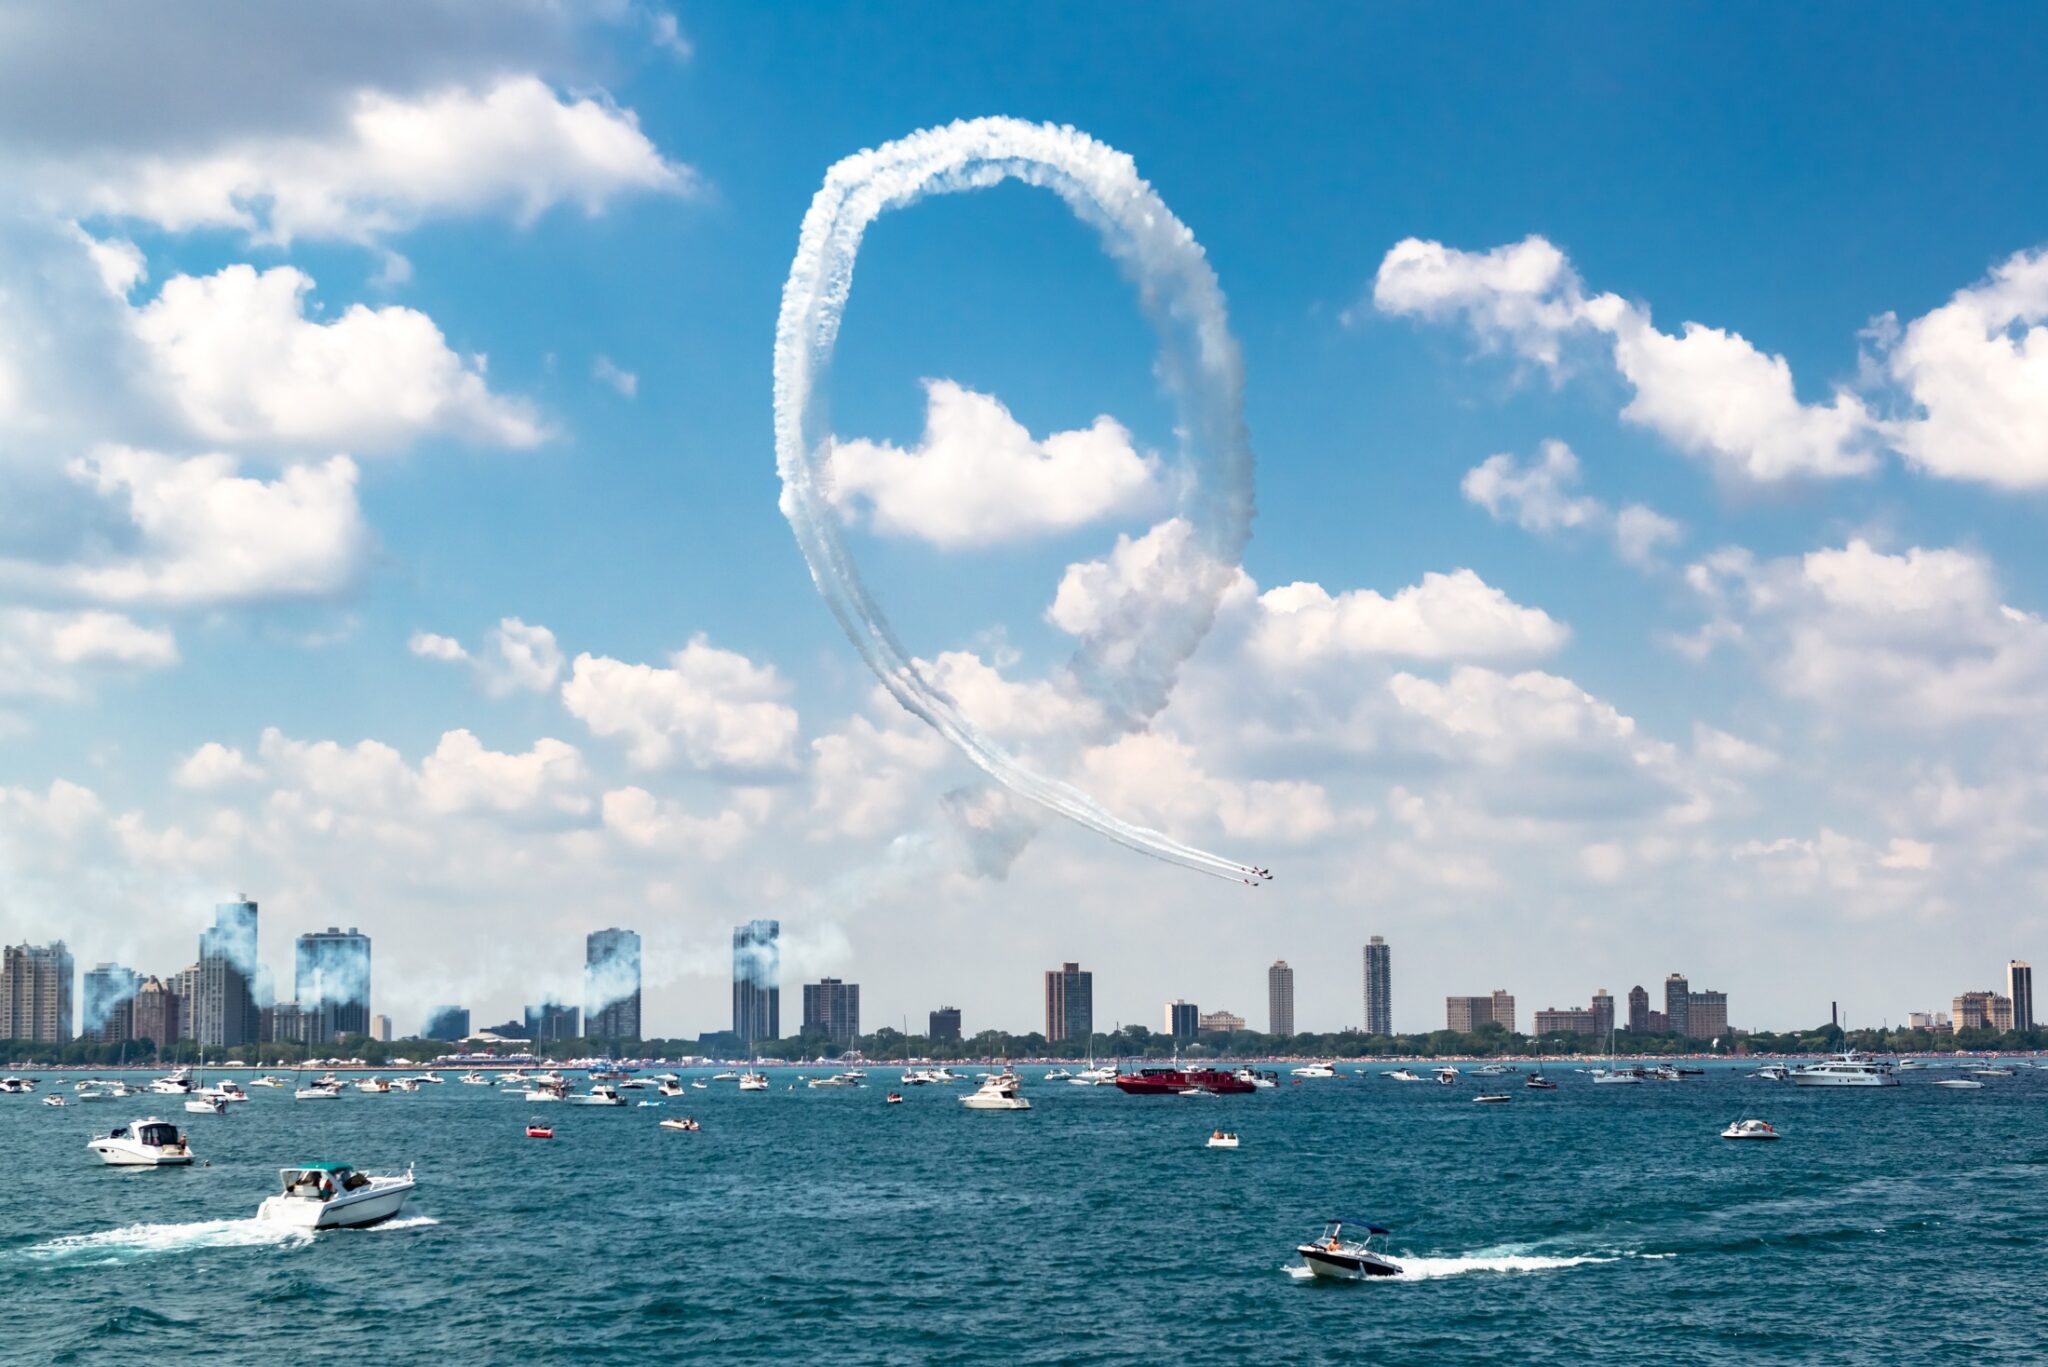 The Chicago Air & Water Show